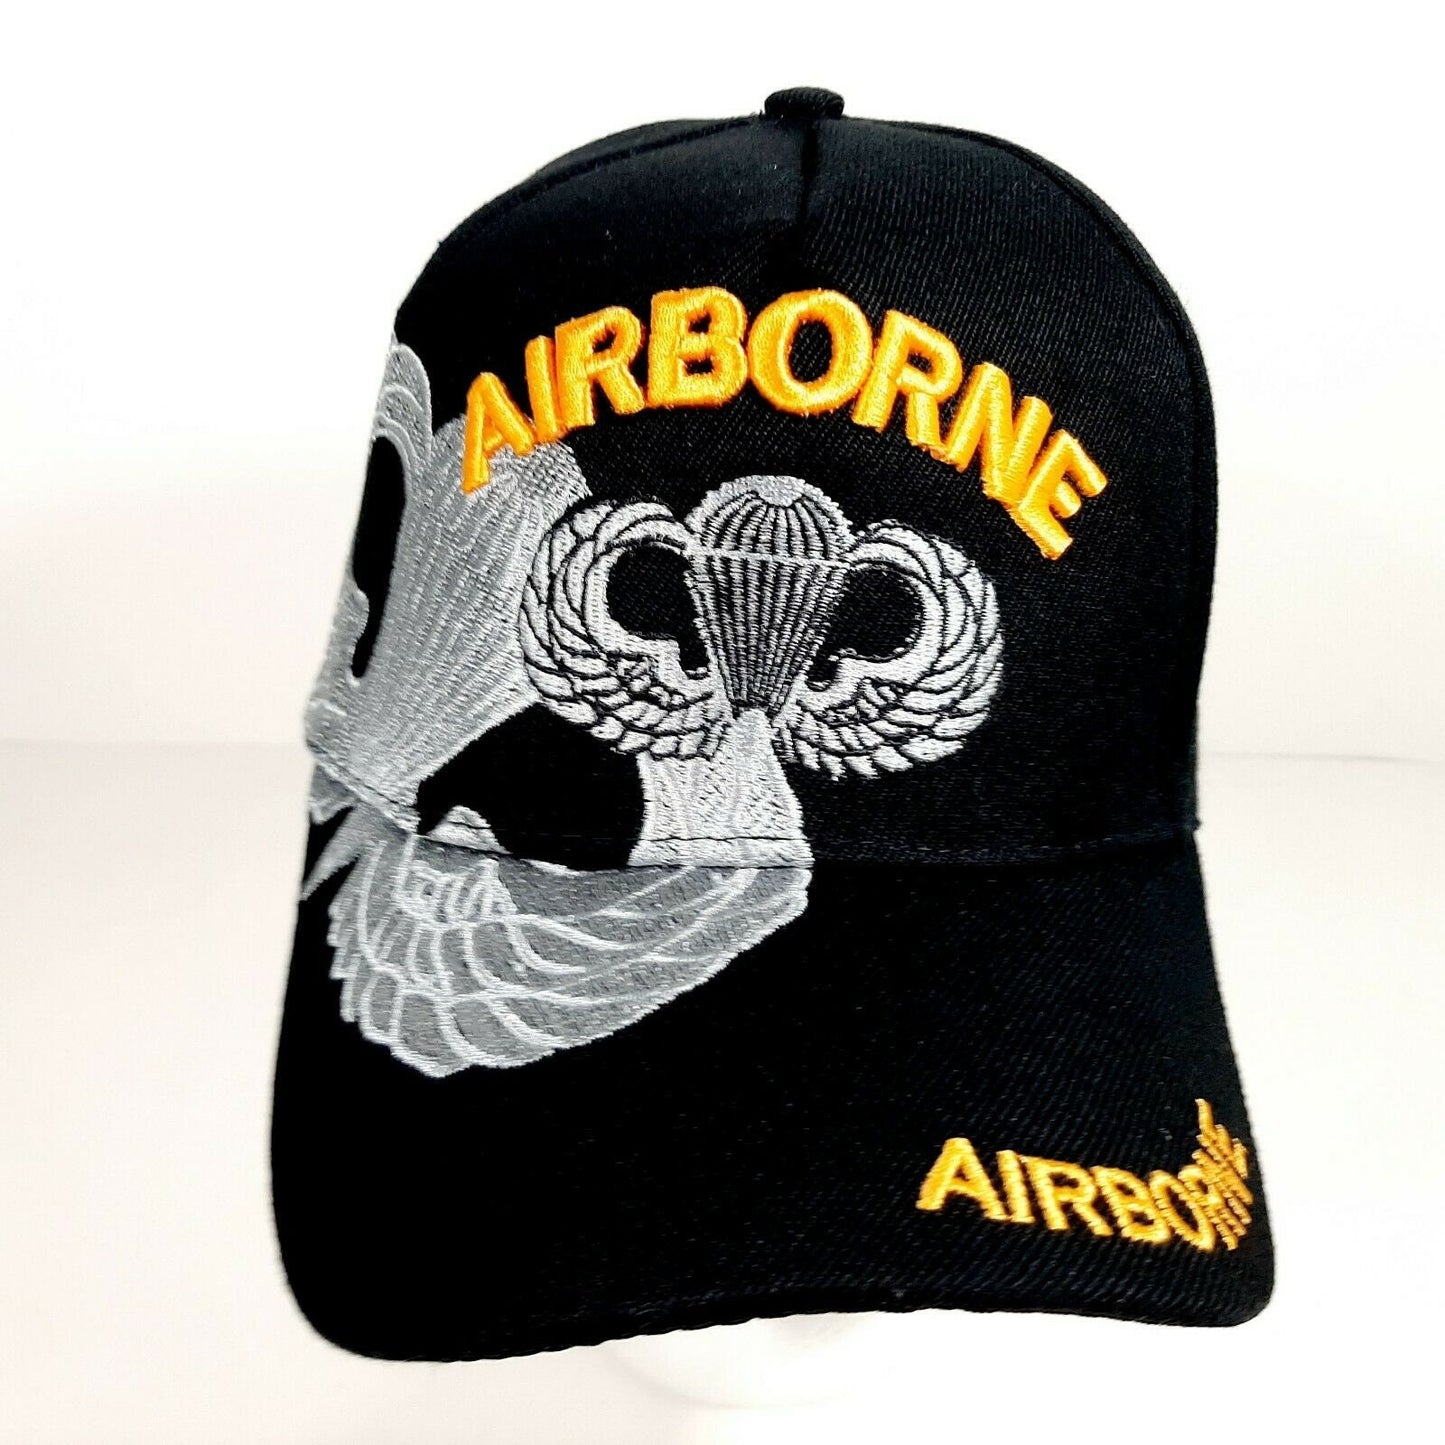 US Army Airborne Men's Cap Hat Embroidered Black Acrylic One Size